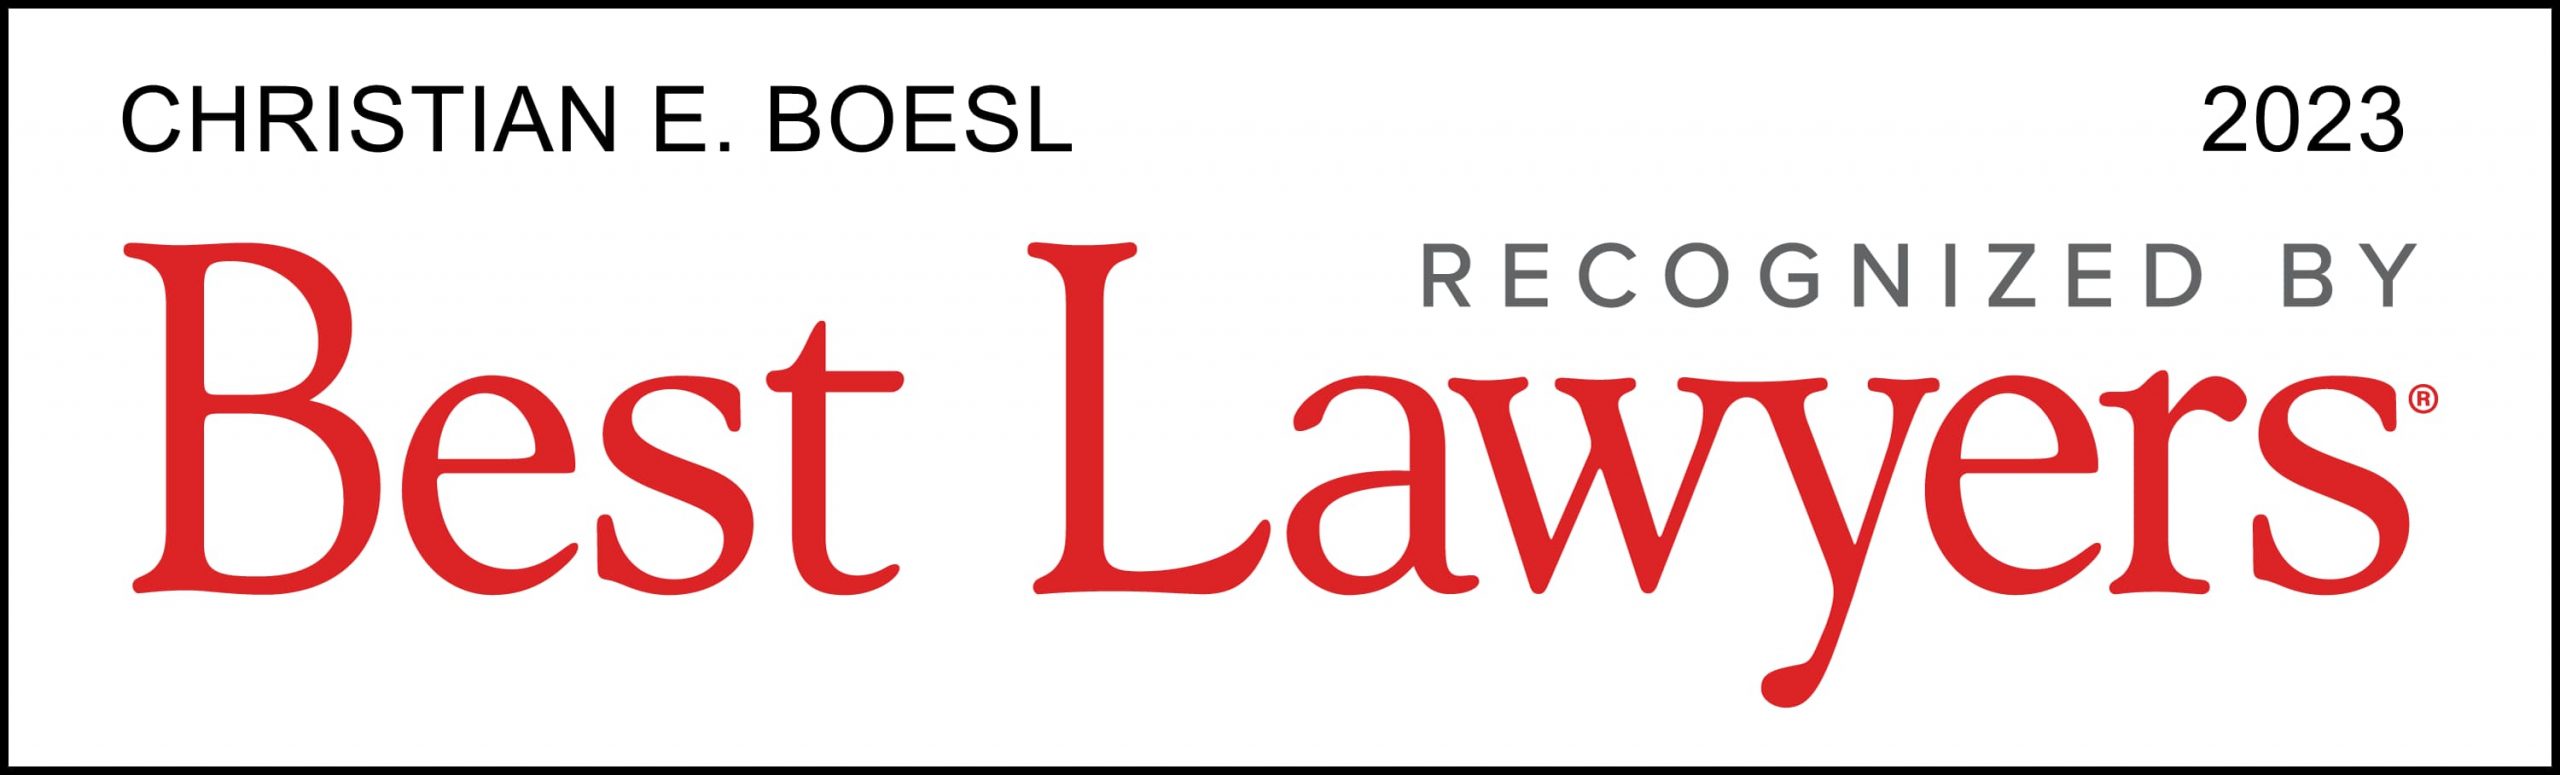 Recognized by Best Lawyers 2023 Award